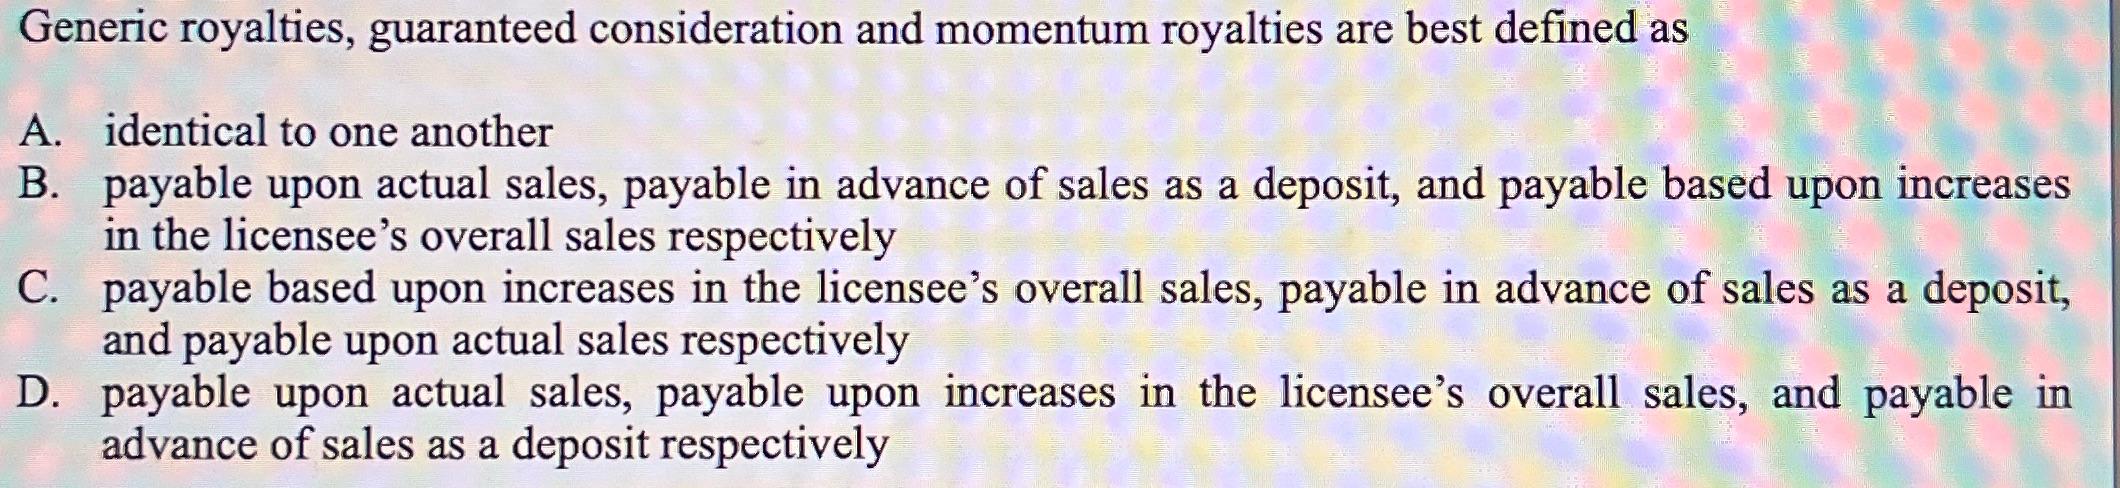 Generic royalties, guaranteed consideration and momentum royalties are best defined as A. identical to one